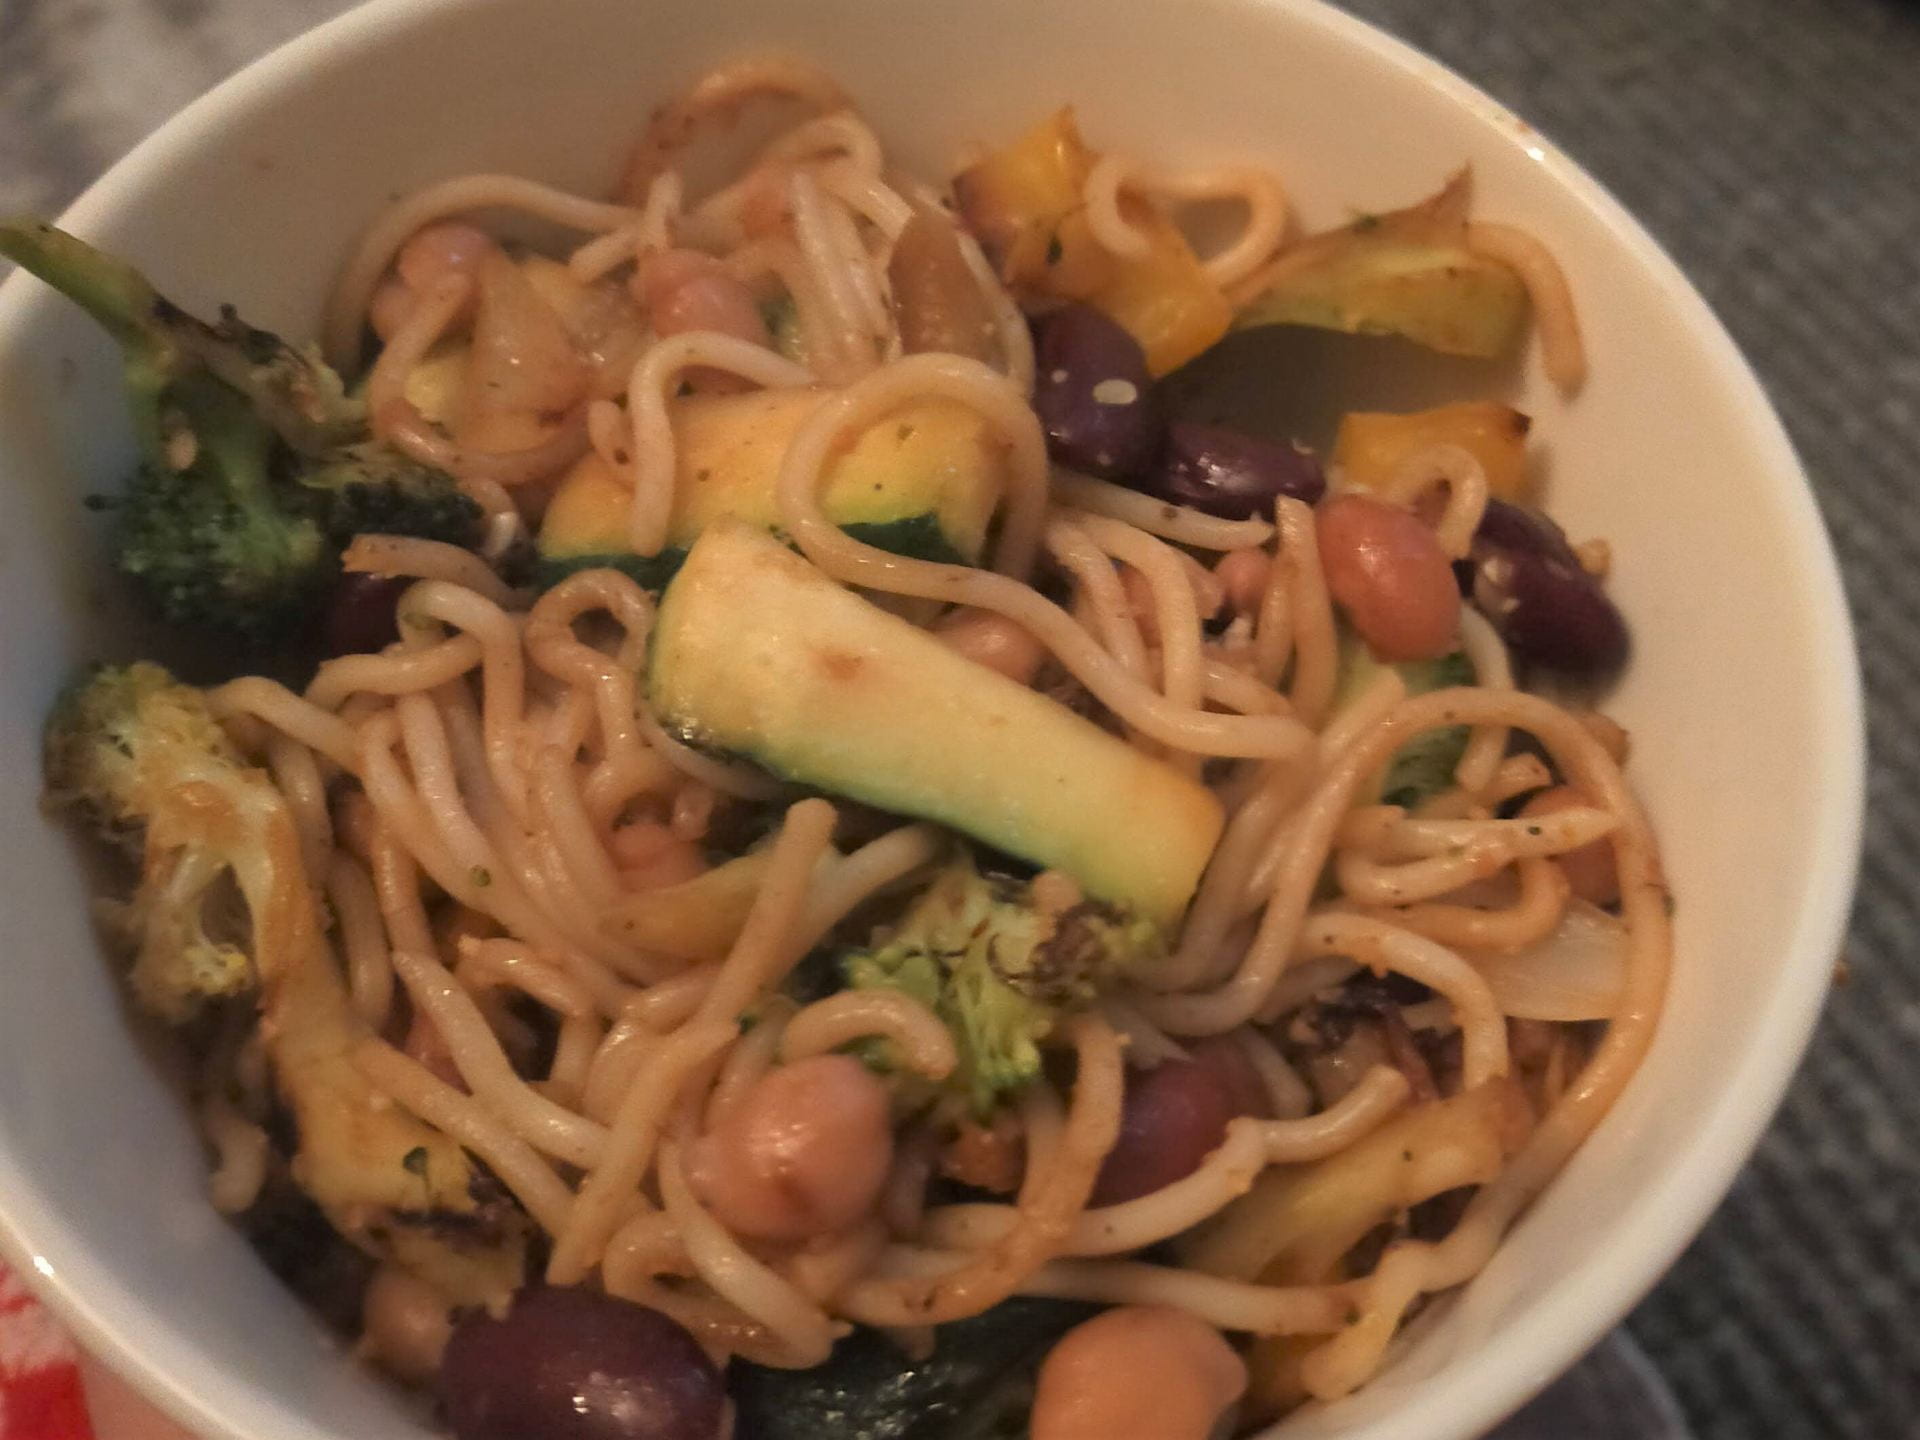 A noodle stir fry. There are noodles in a bowl with vegetables, including broccoli and courgette.